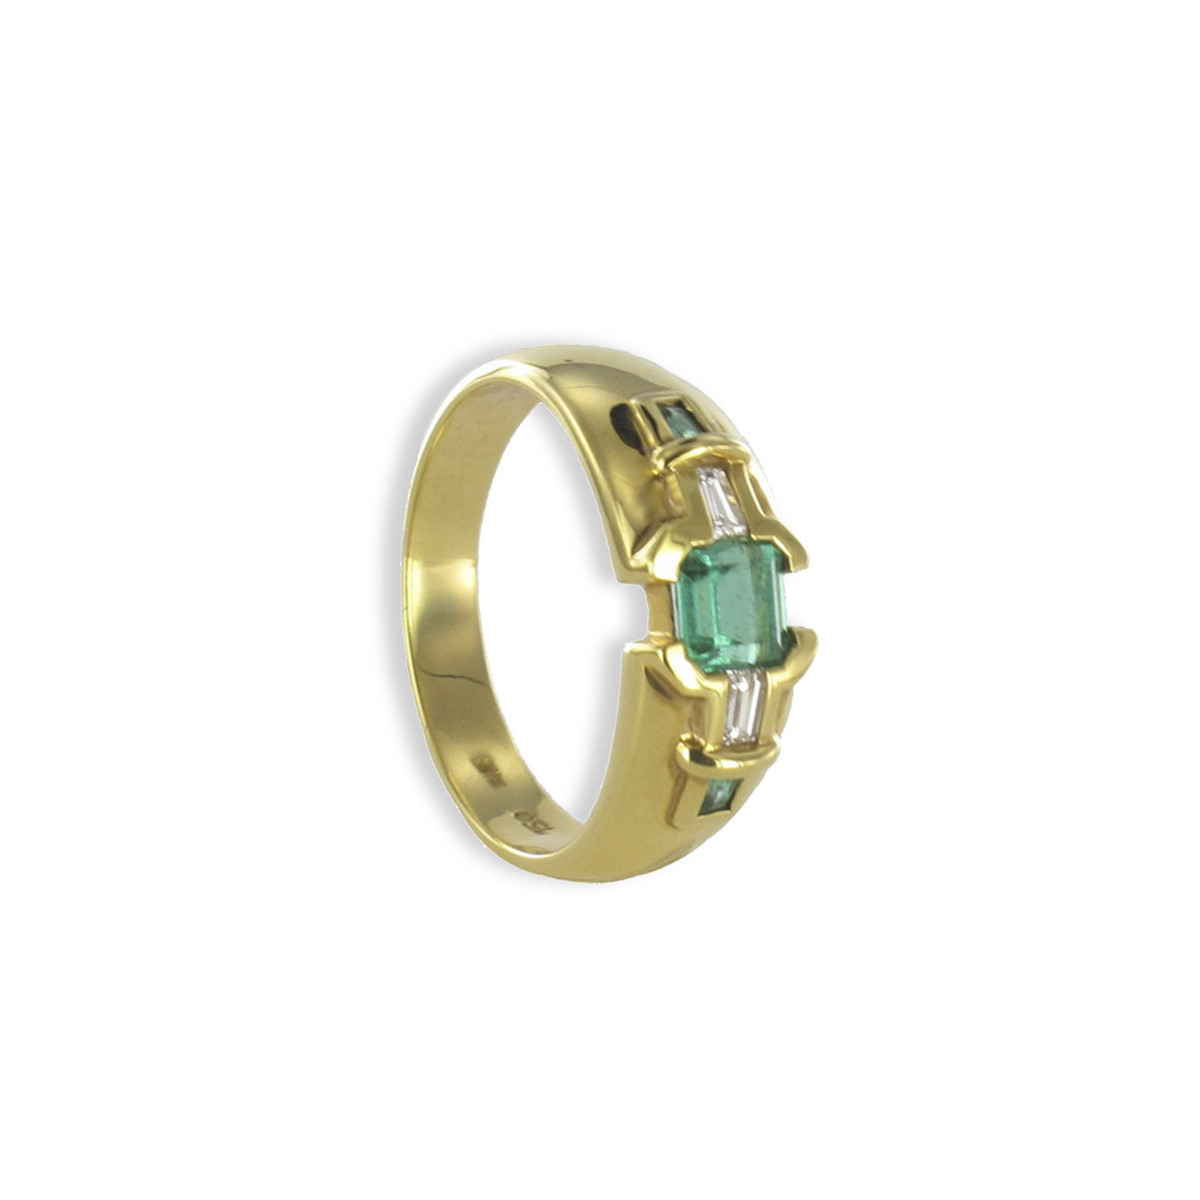 GOLD DIAMONDS AND EMERALD 0,75 KTES RING